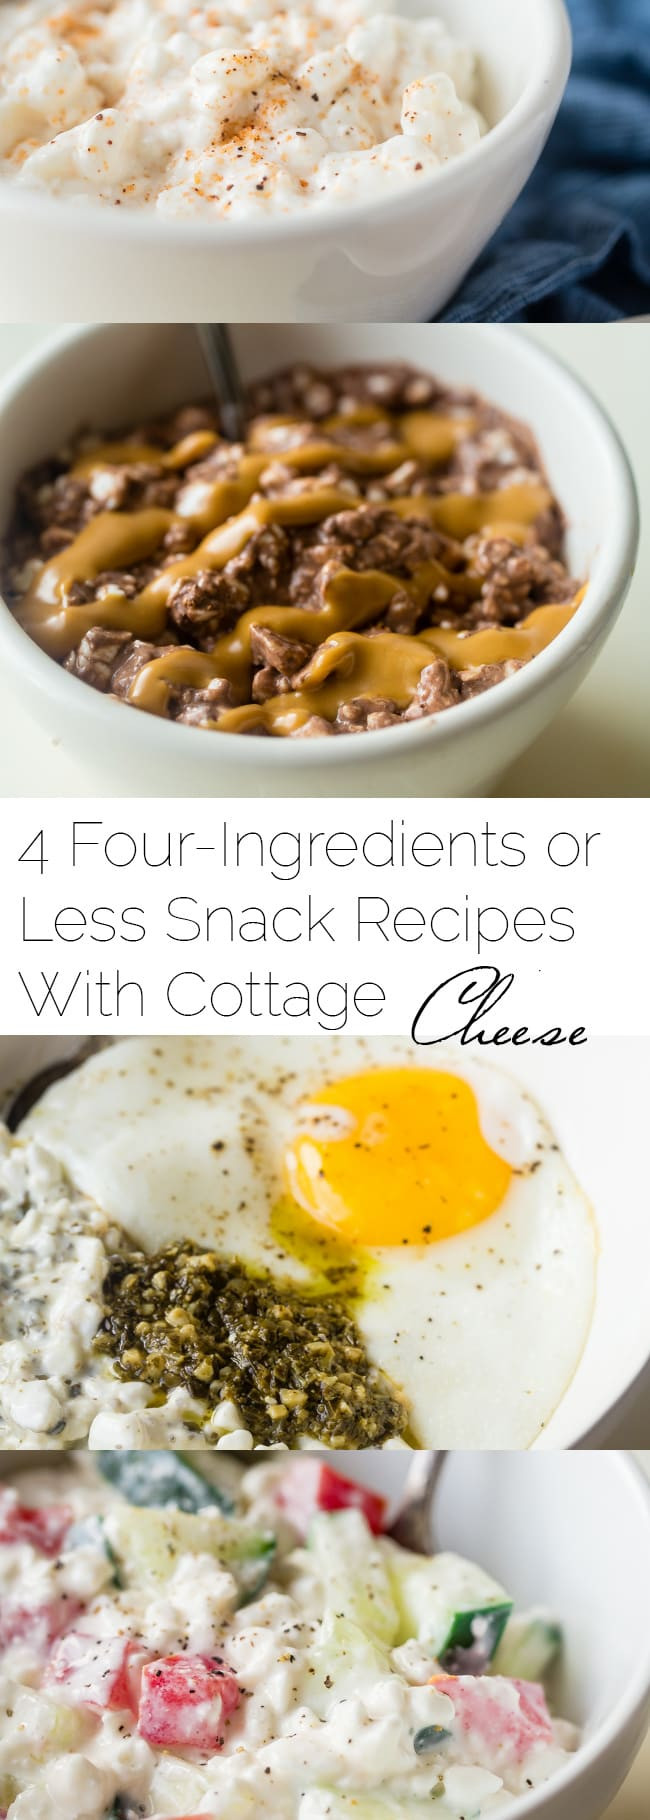 Healthy Cheese Snacks
 Healthy Snack Recipes with Cottage Cheese